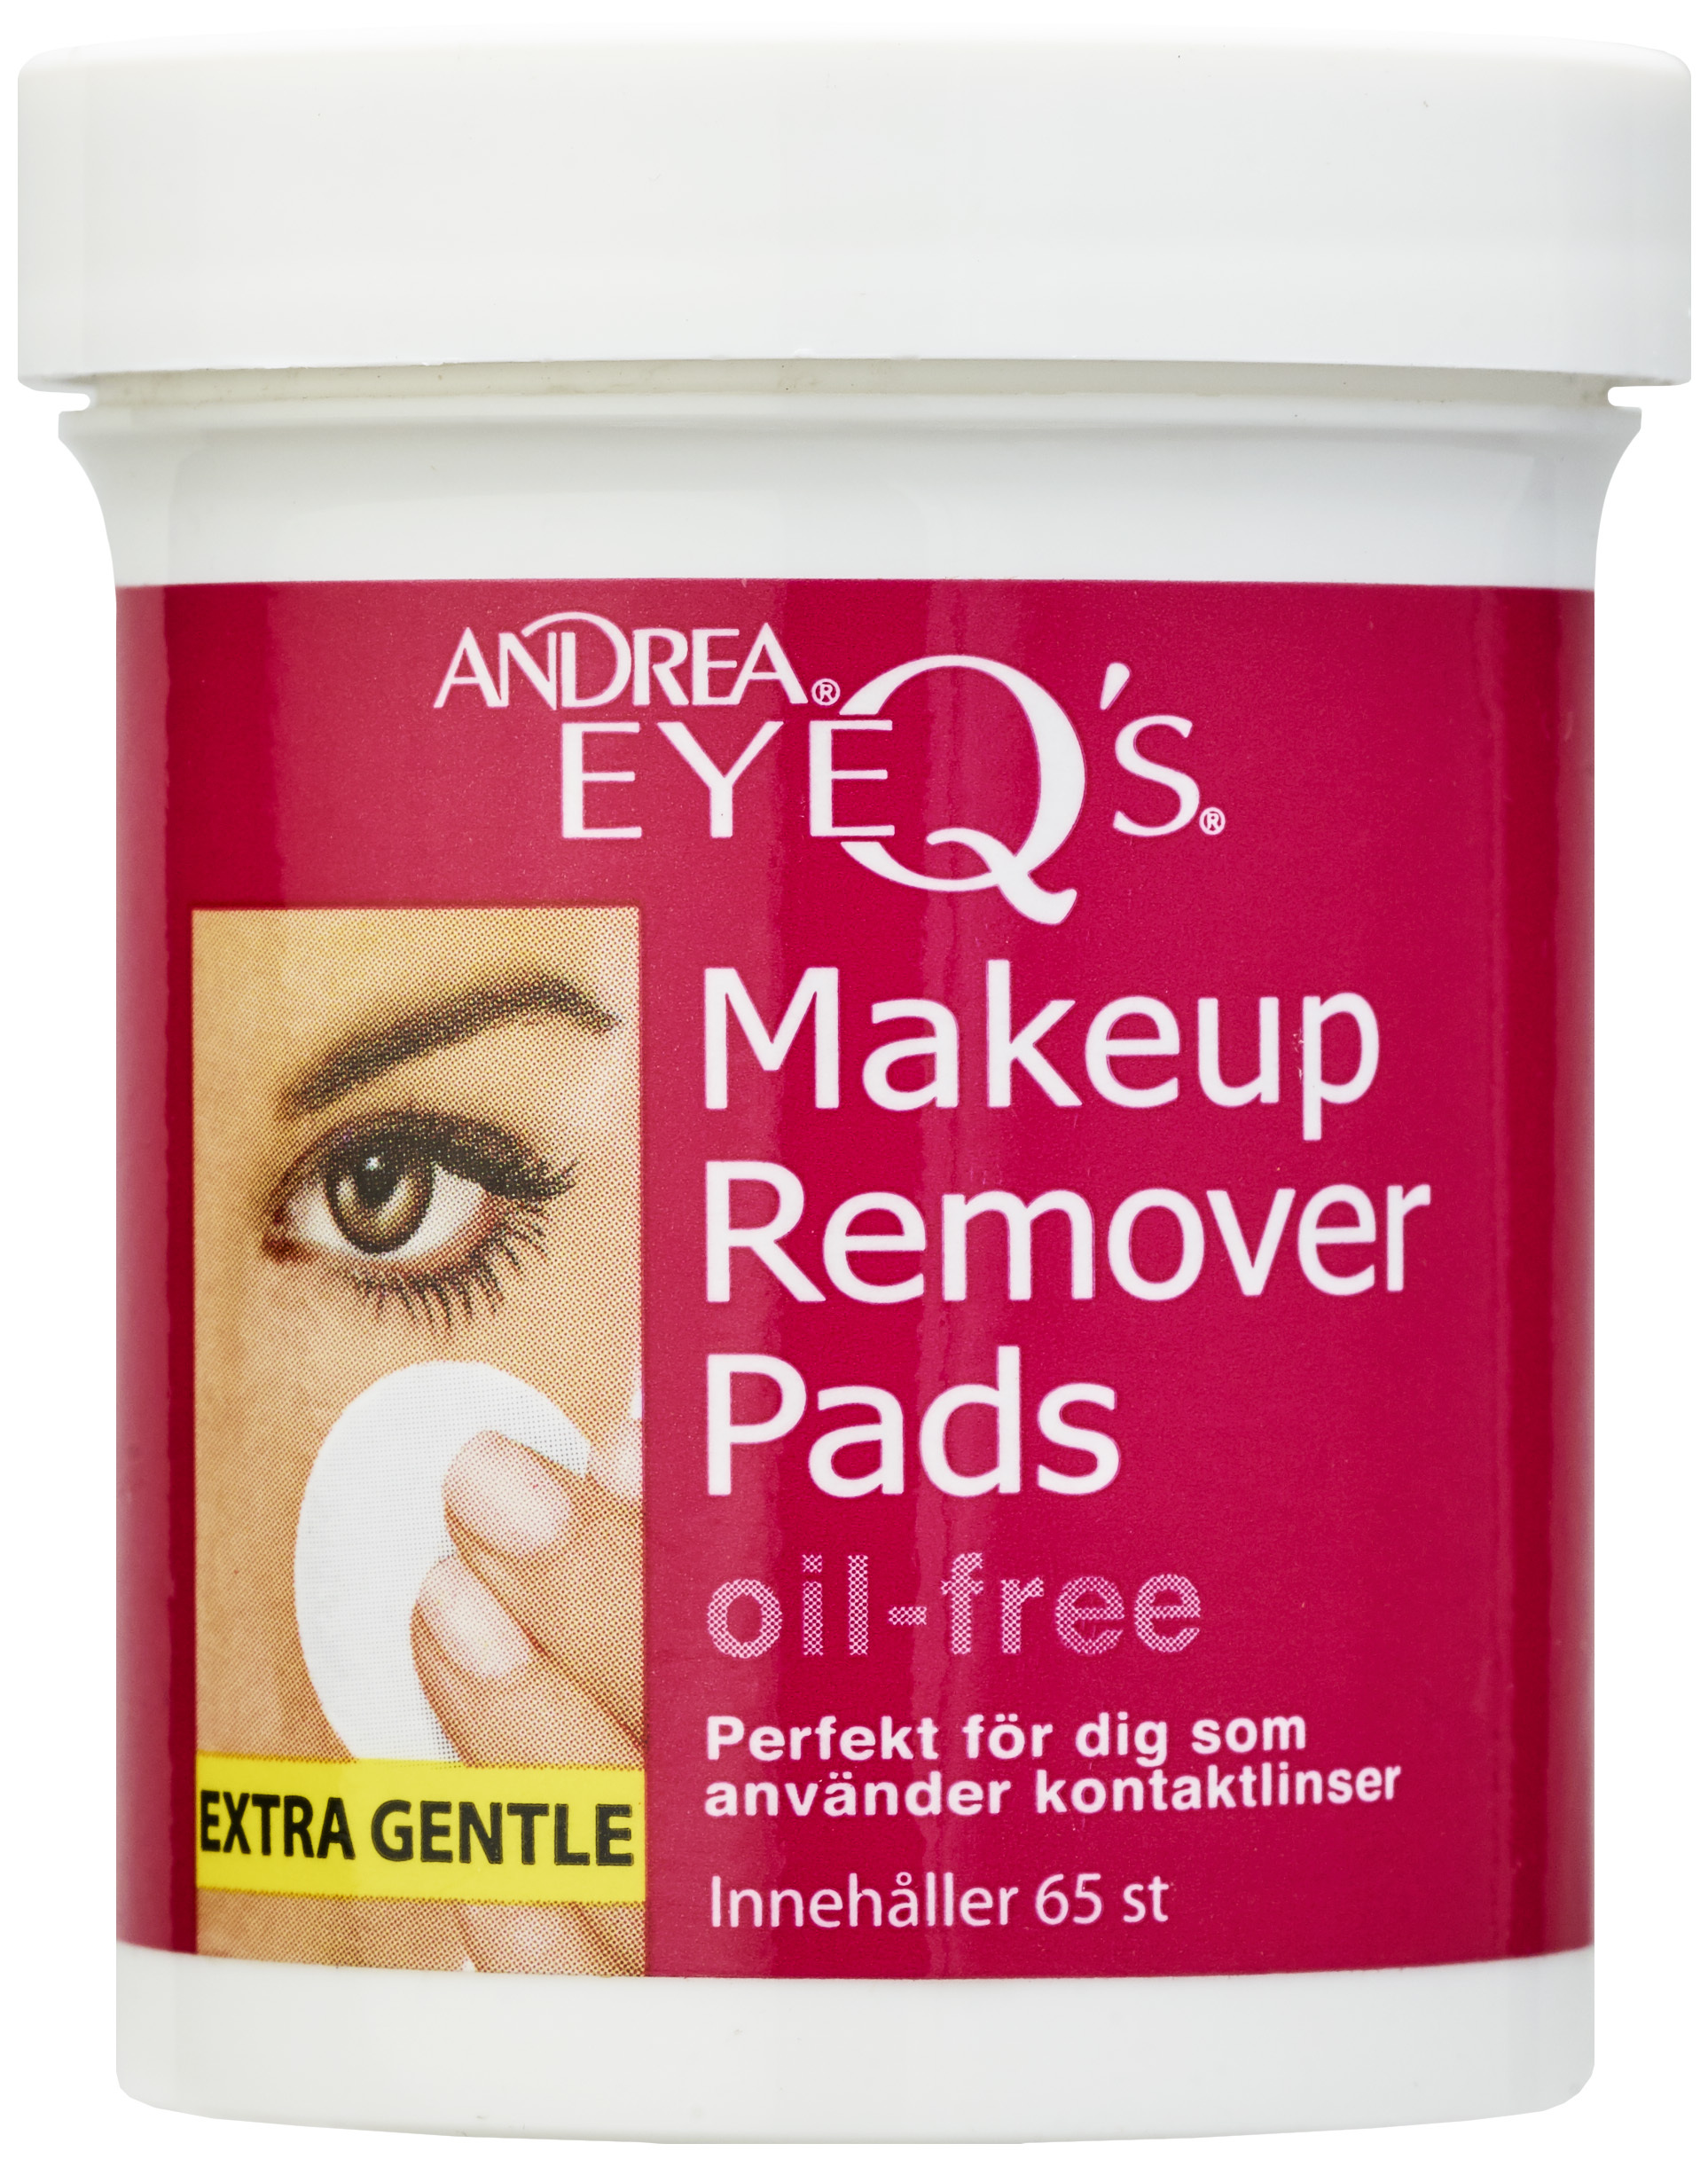 Andrea EyeQ's Oil-Free makeup Remover Pads 65 st